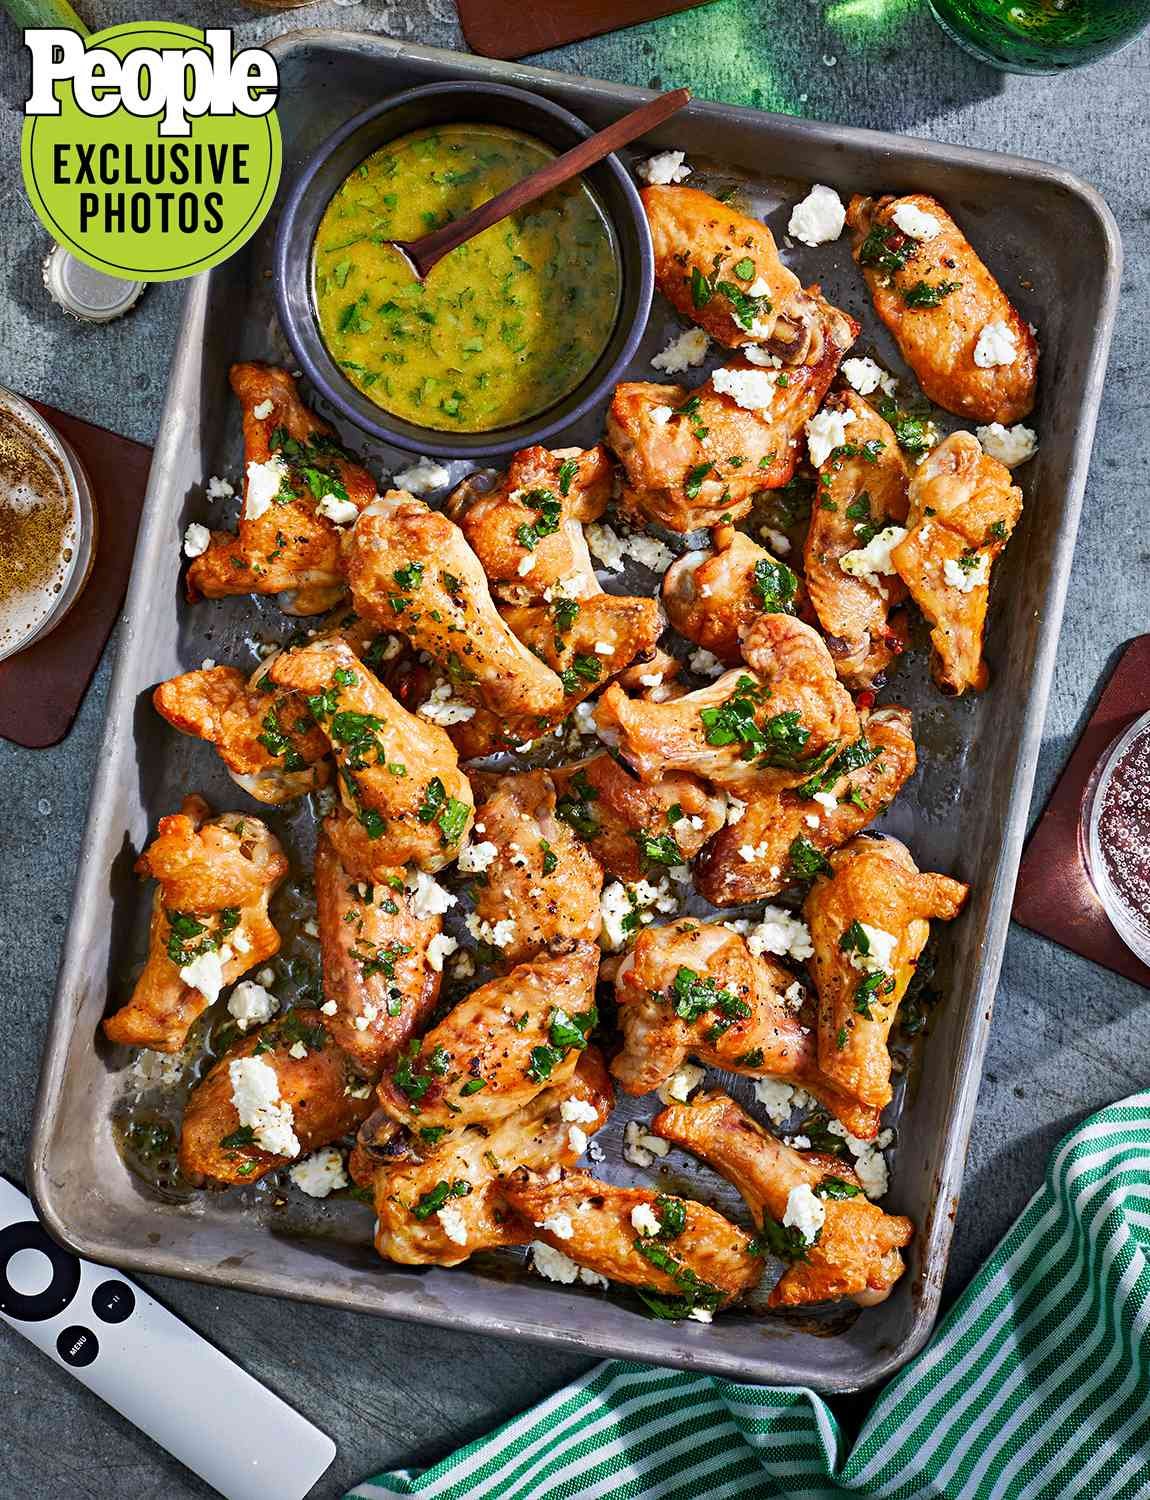 Mashama Bailey's Baked Greek-Style Chicken Wings with Feta